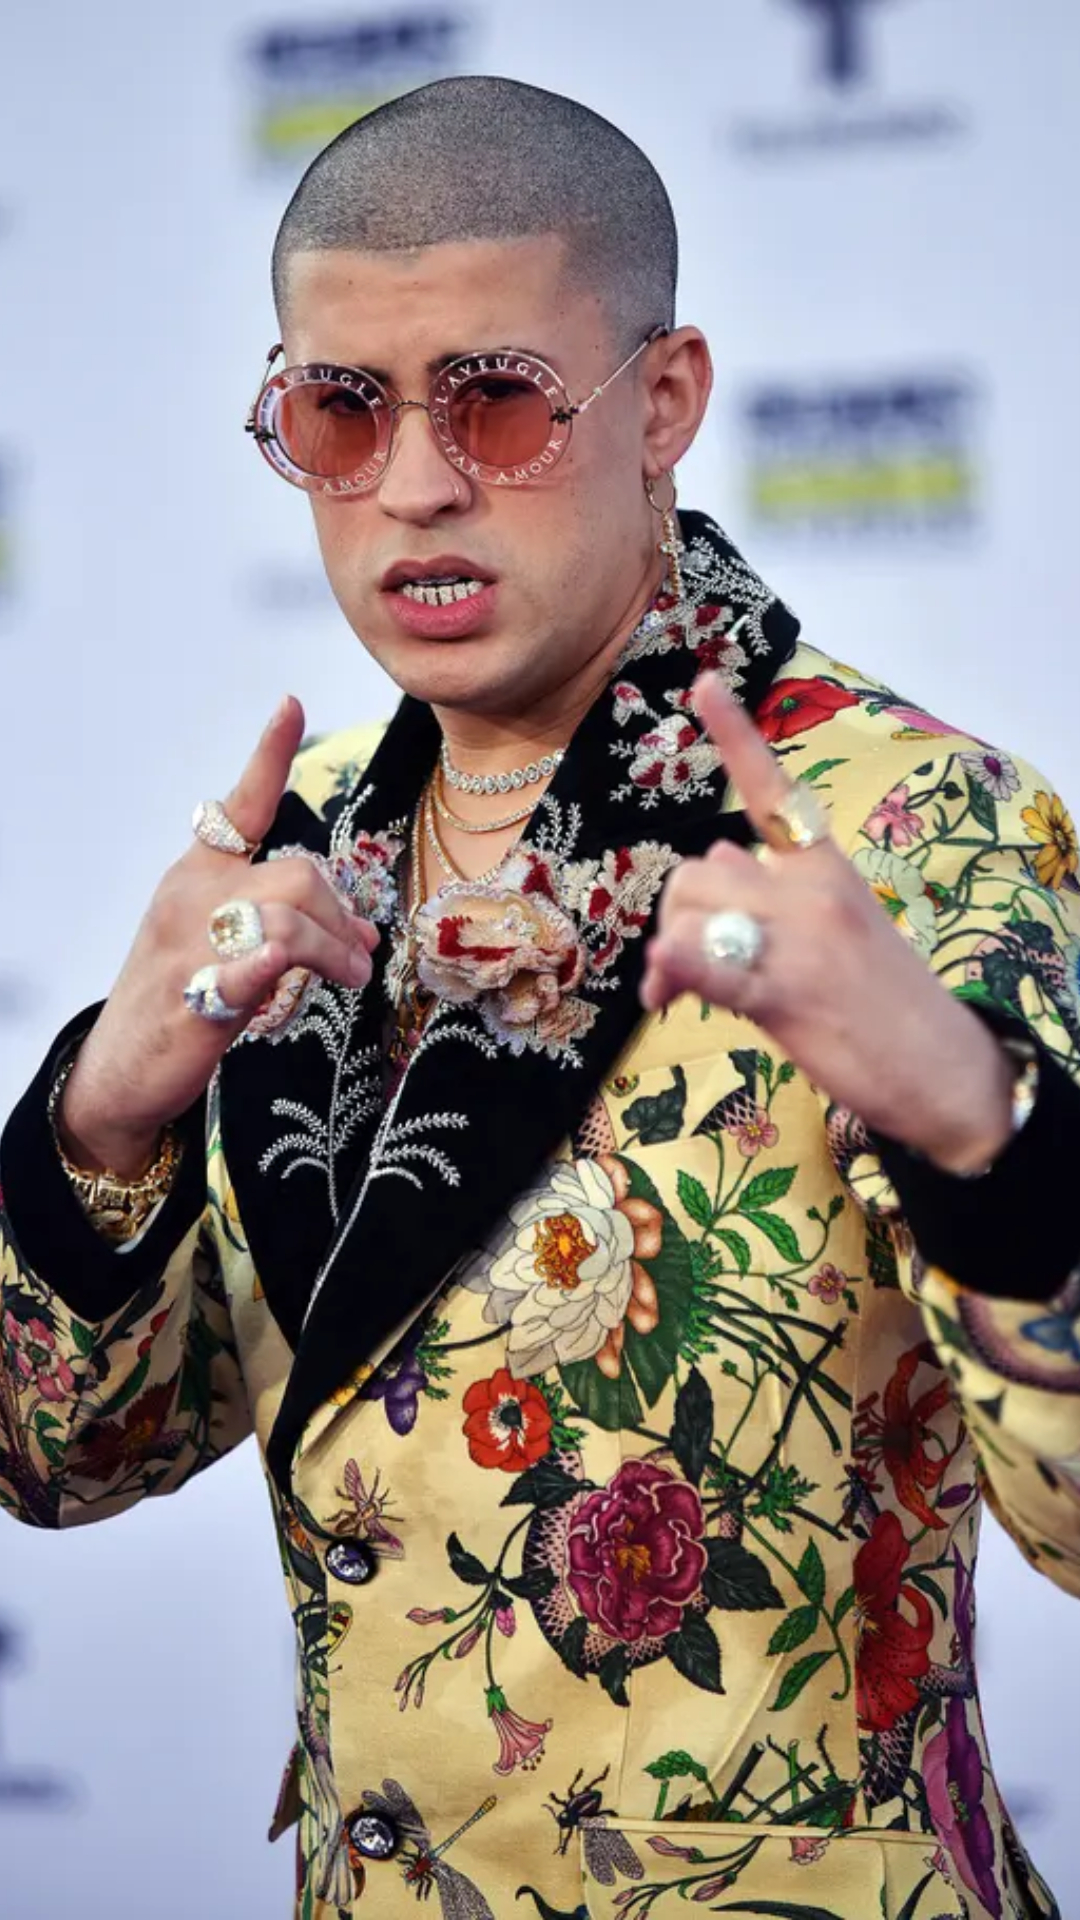 on no. 2 was bad bunny from puerto rico, who received 14.7 billion streams